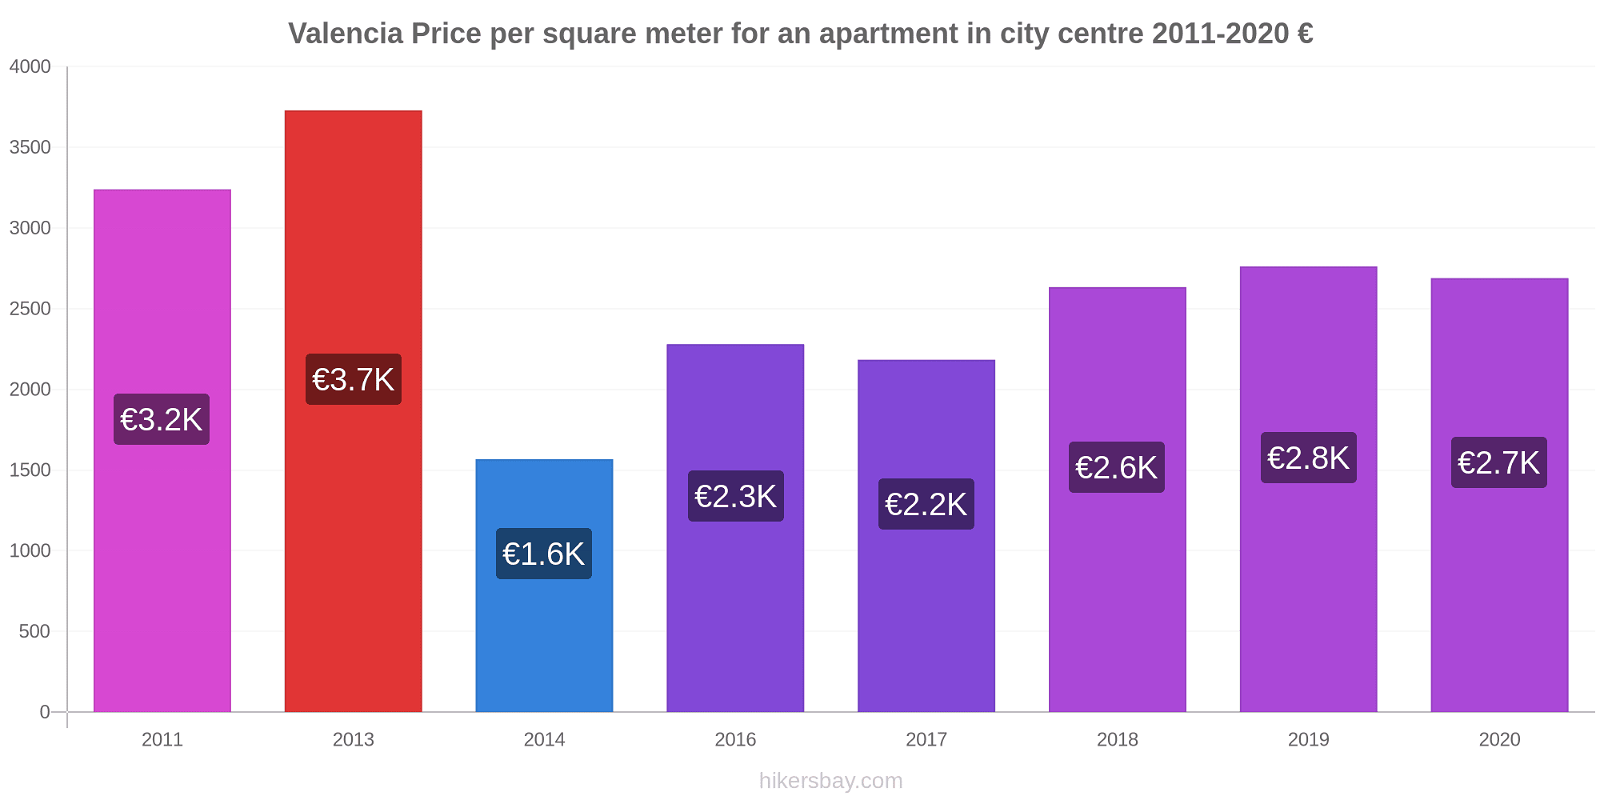 Valencia price changes Price per square meter for an apartment in city centre hikersbay.com